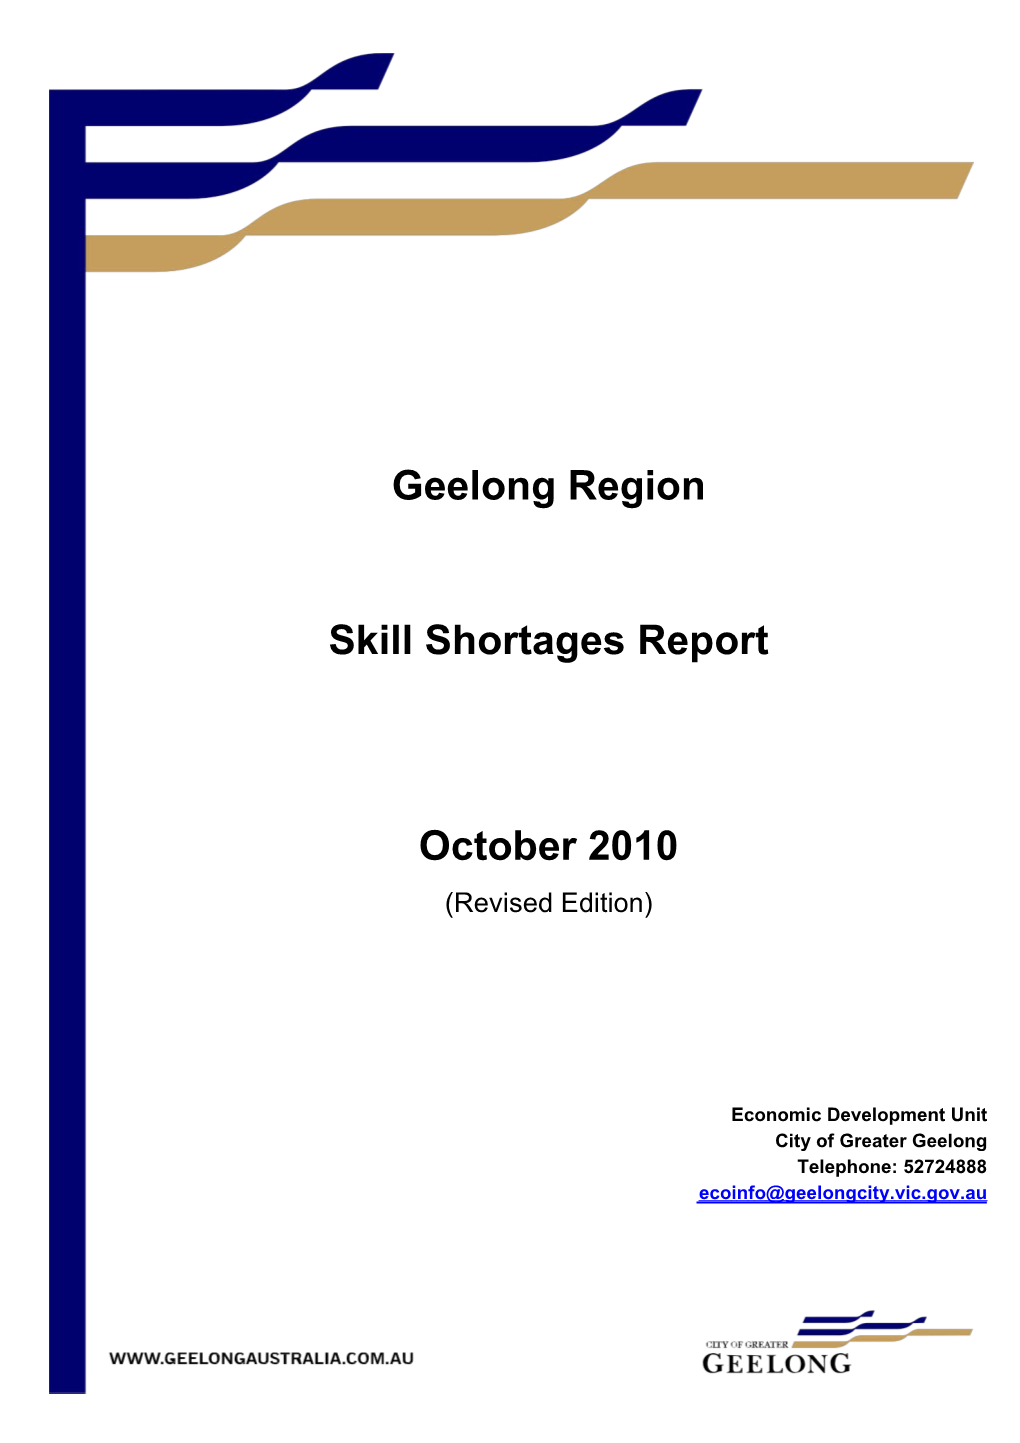 Microsoft Word - Geelong Region Skill Shortages Report Sep 2010 - ANZSCO.D 205